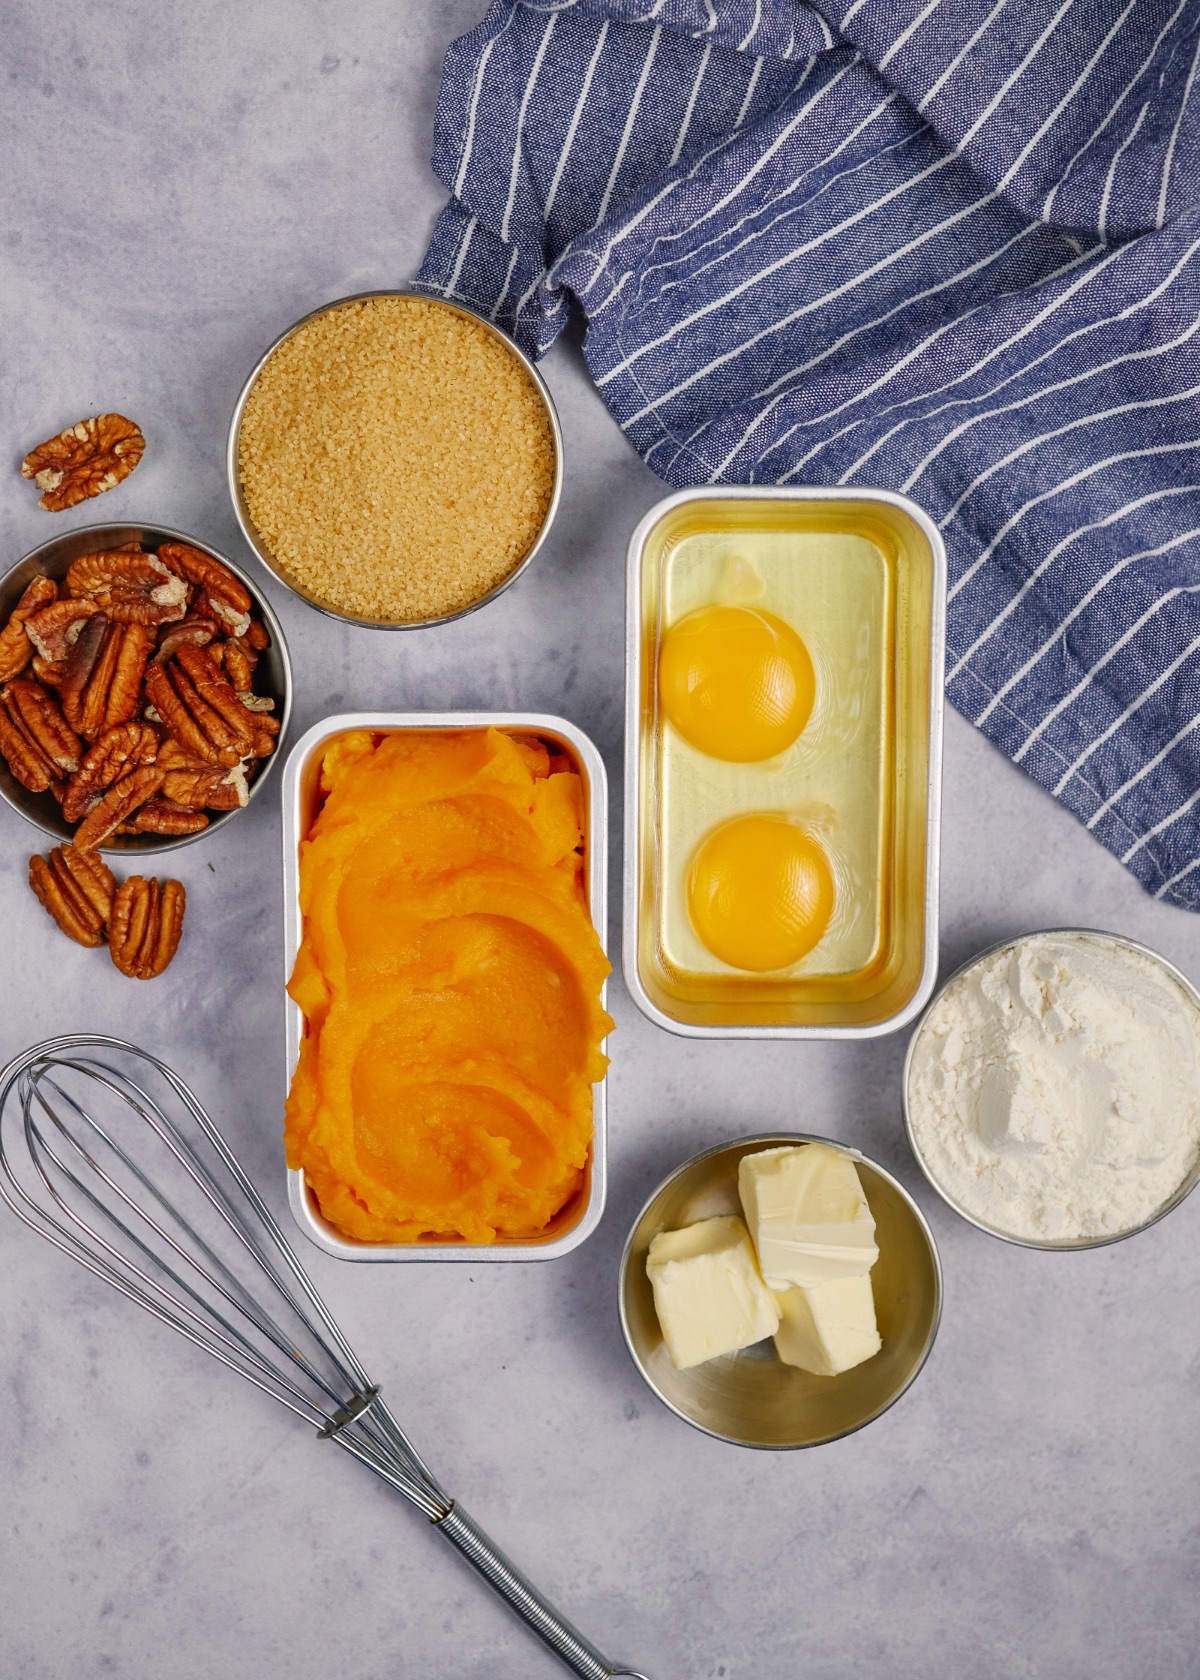 ingredients for sweet potato casserole in small bowls